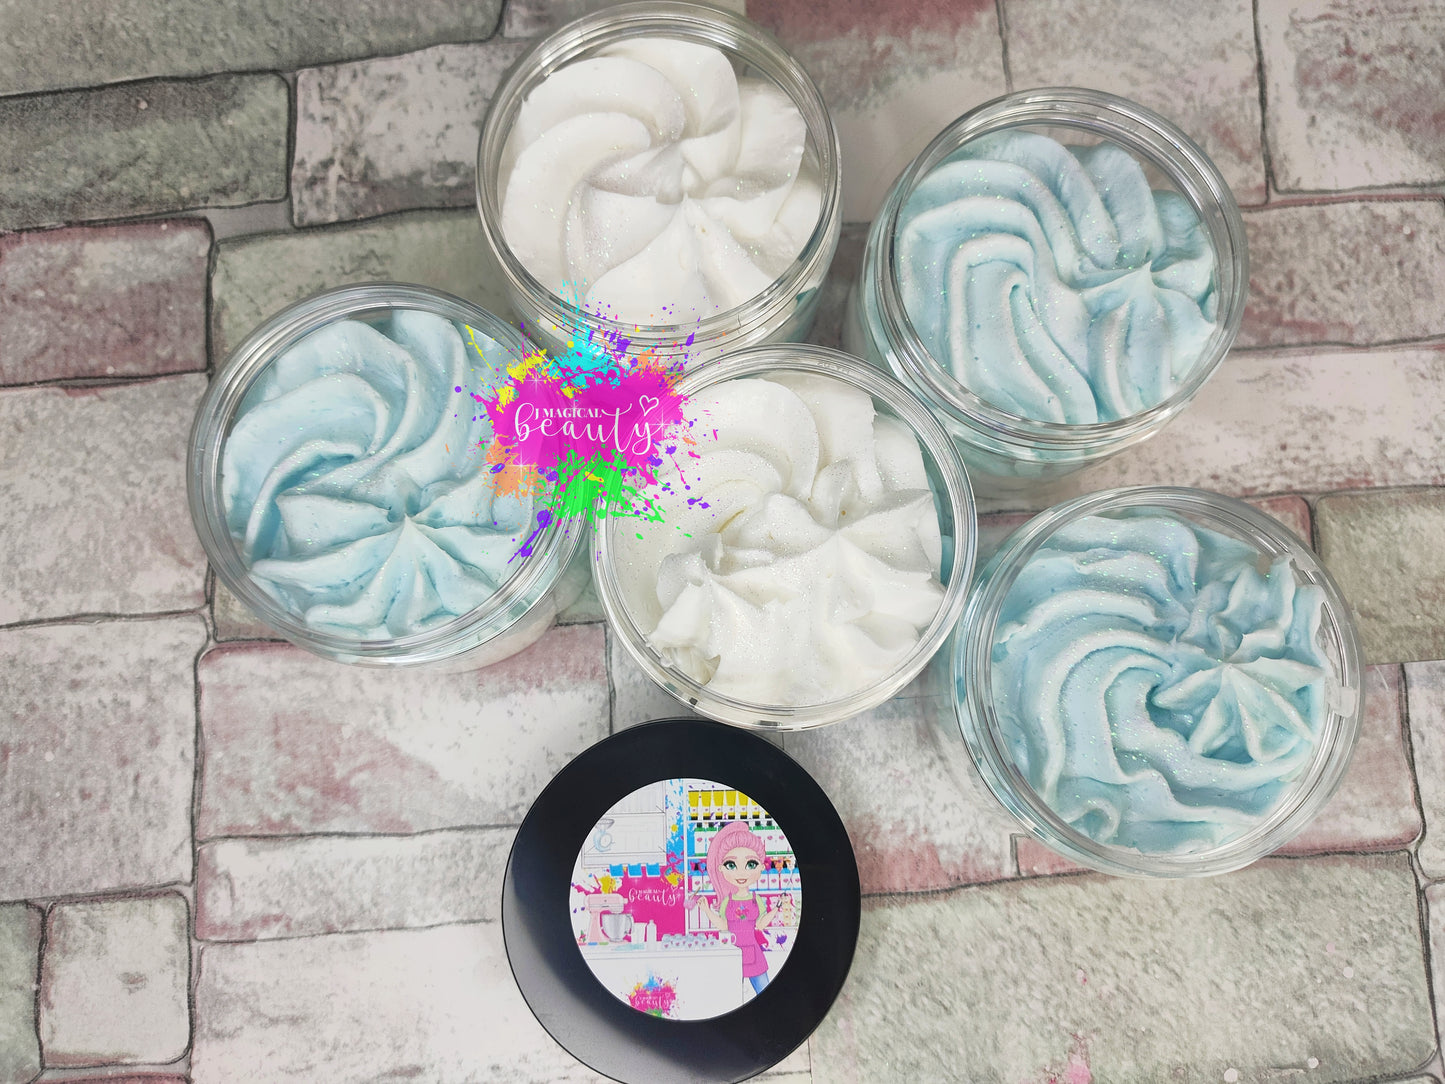 Whipped Soap Hibiscus & Coconut Water scent